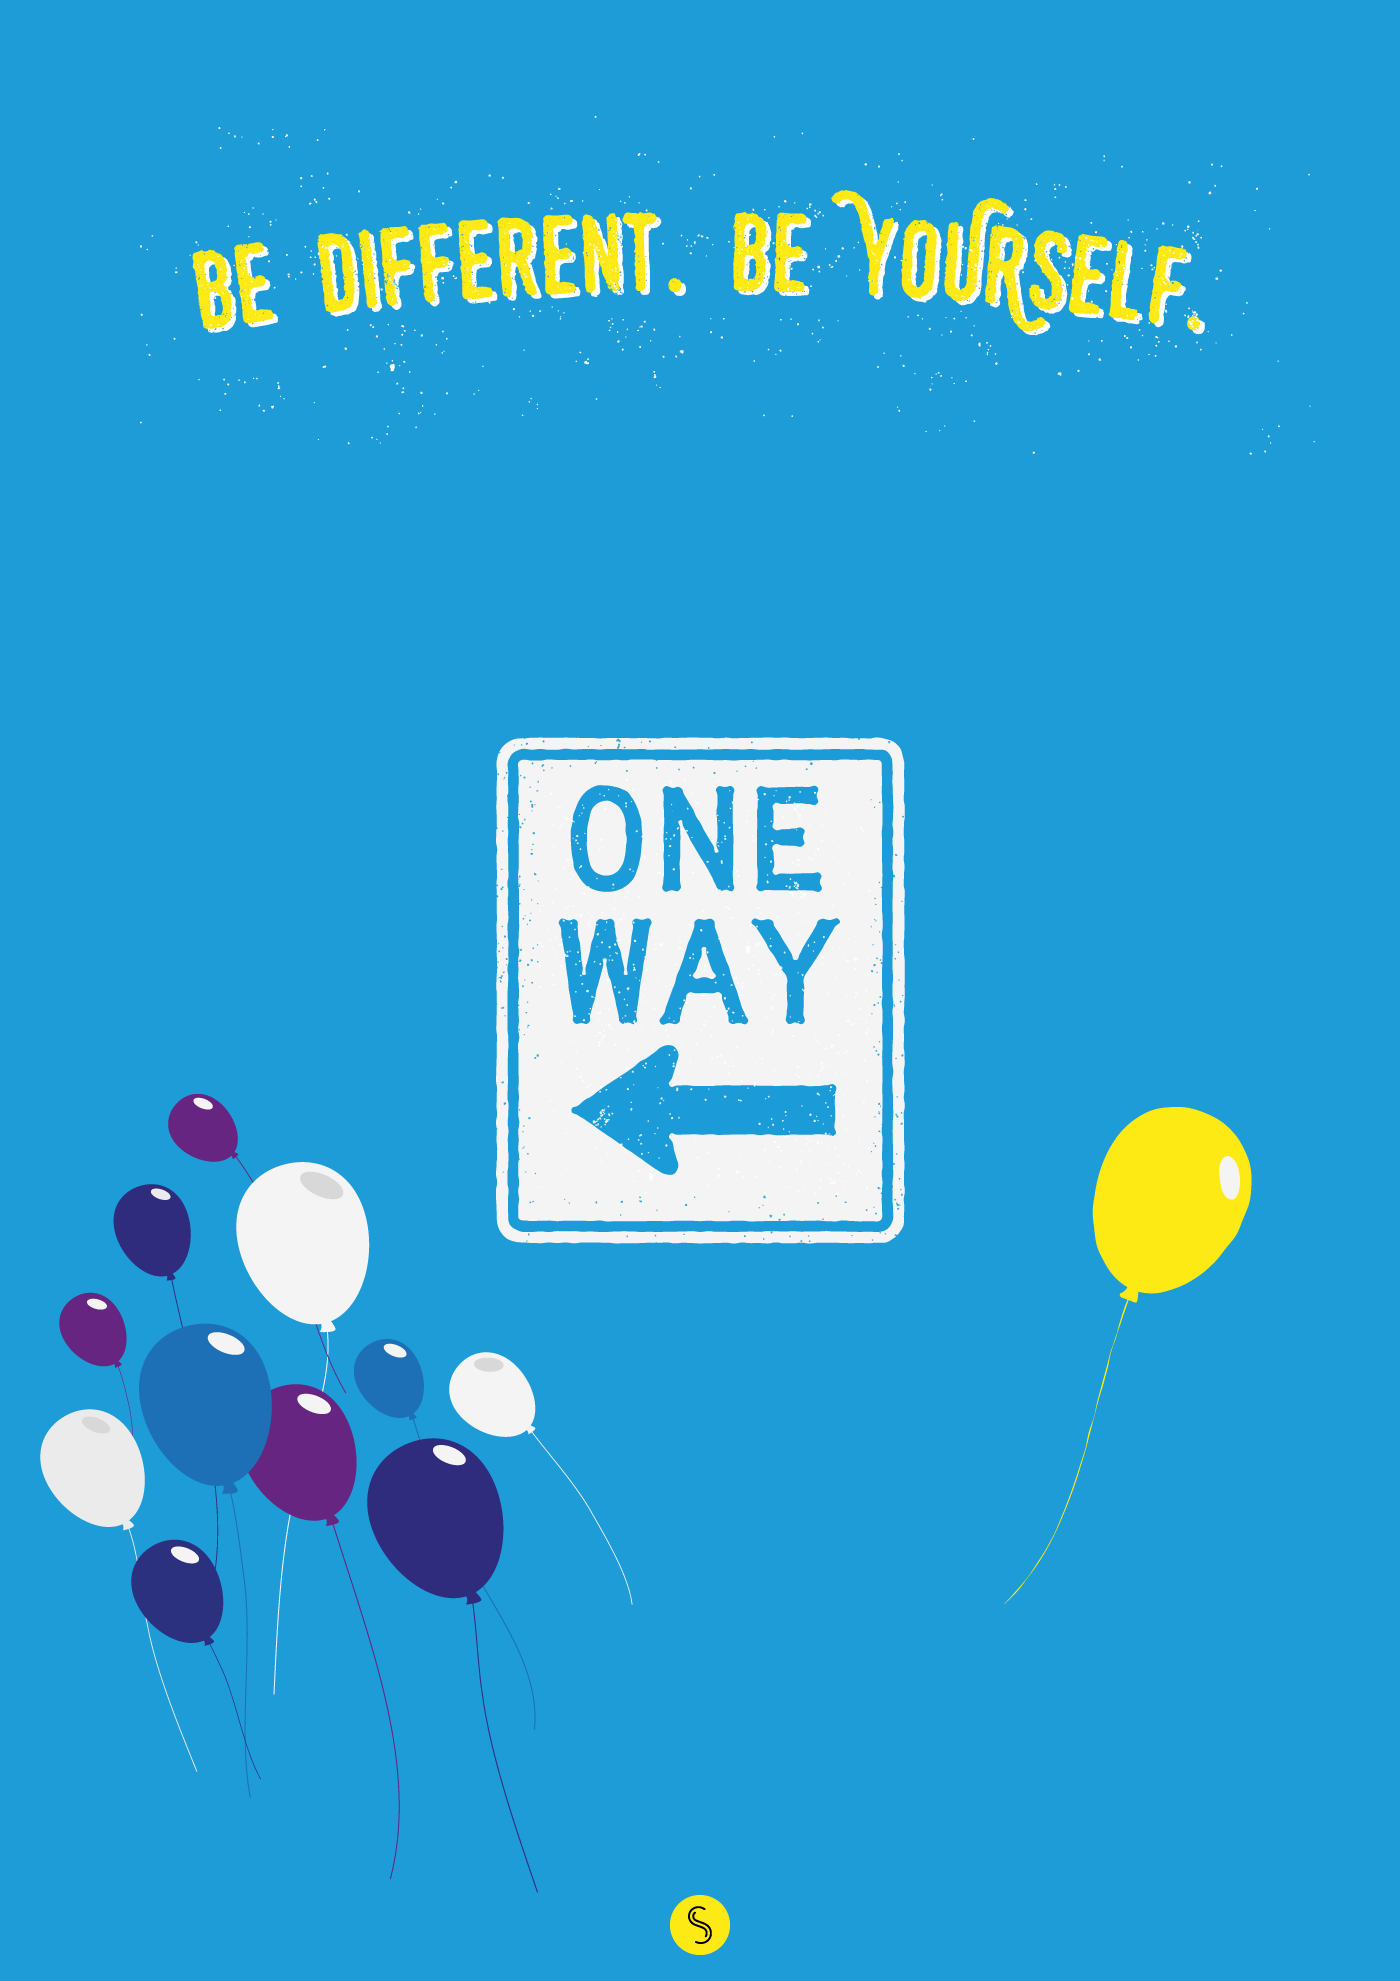 yourself different balloons inspiration poster wallpaper download blue yellow liliana sabato